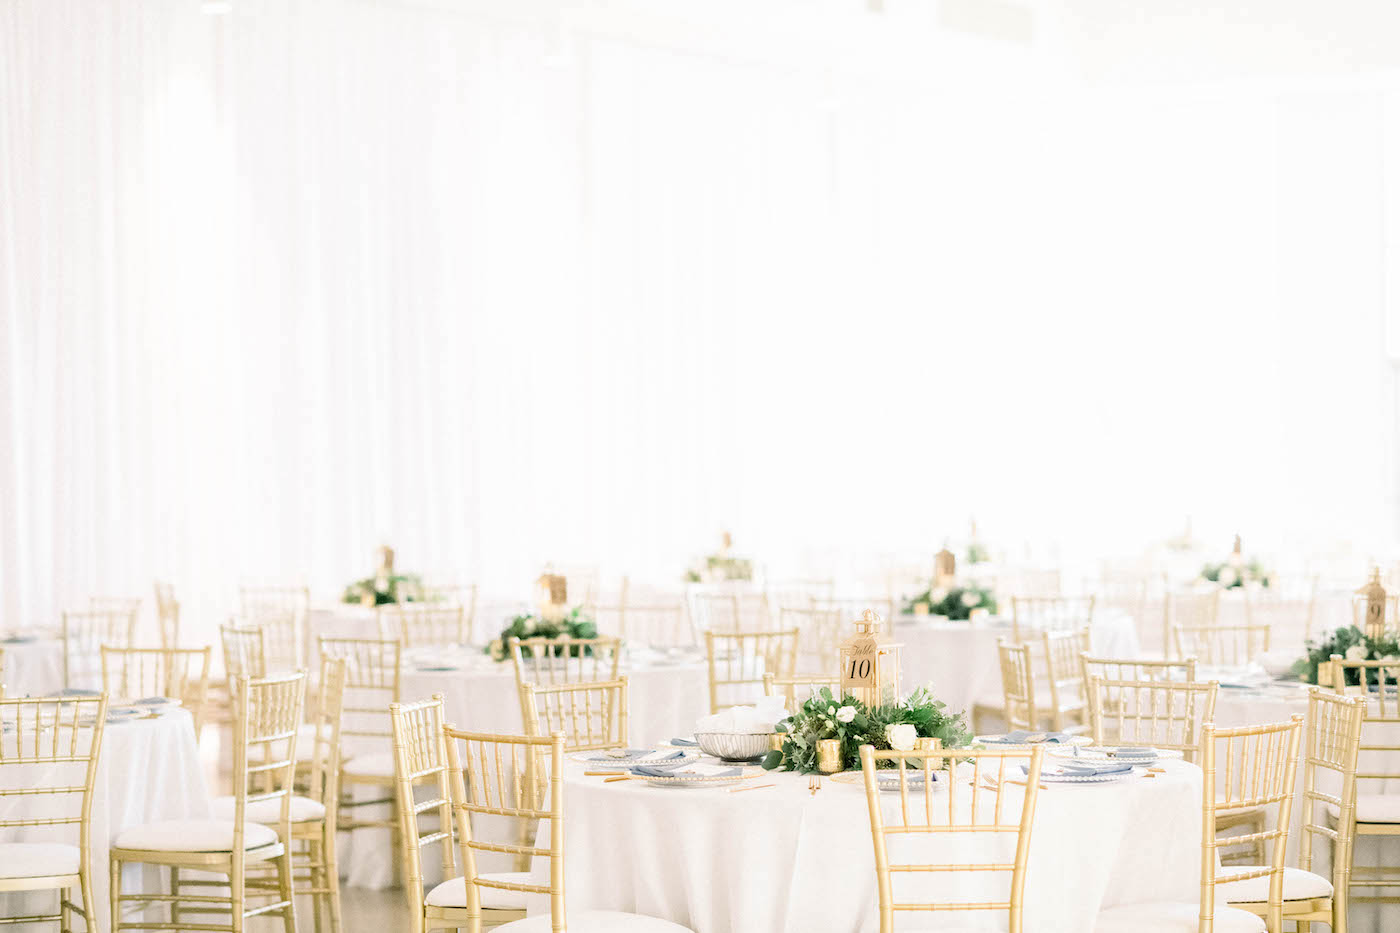 Tampa Wedding Venue the Tampa Garden Club Indoor Reception | Wedding Reception Tables with White Linens and Gold Chiavari Chairs and Low Greenery and Lantern Centerpieces | Gabro Event Services